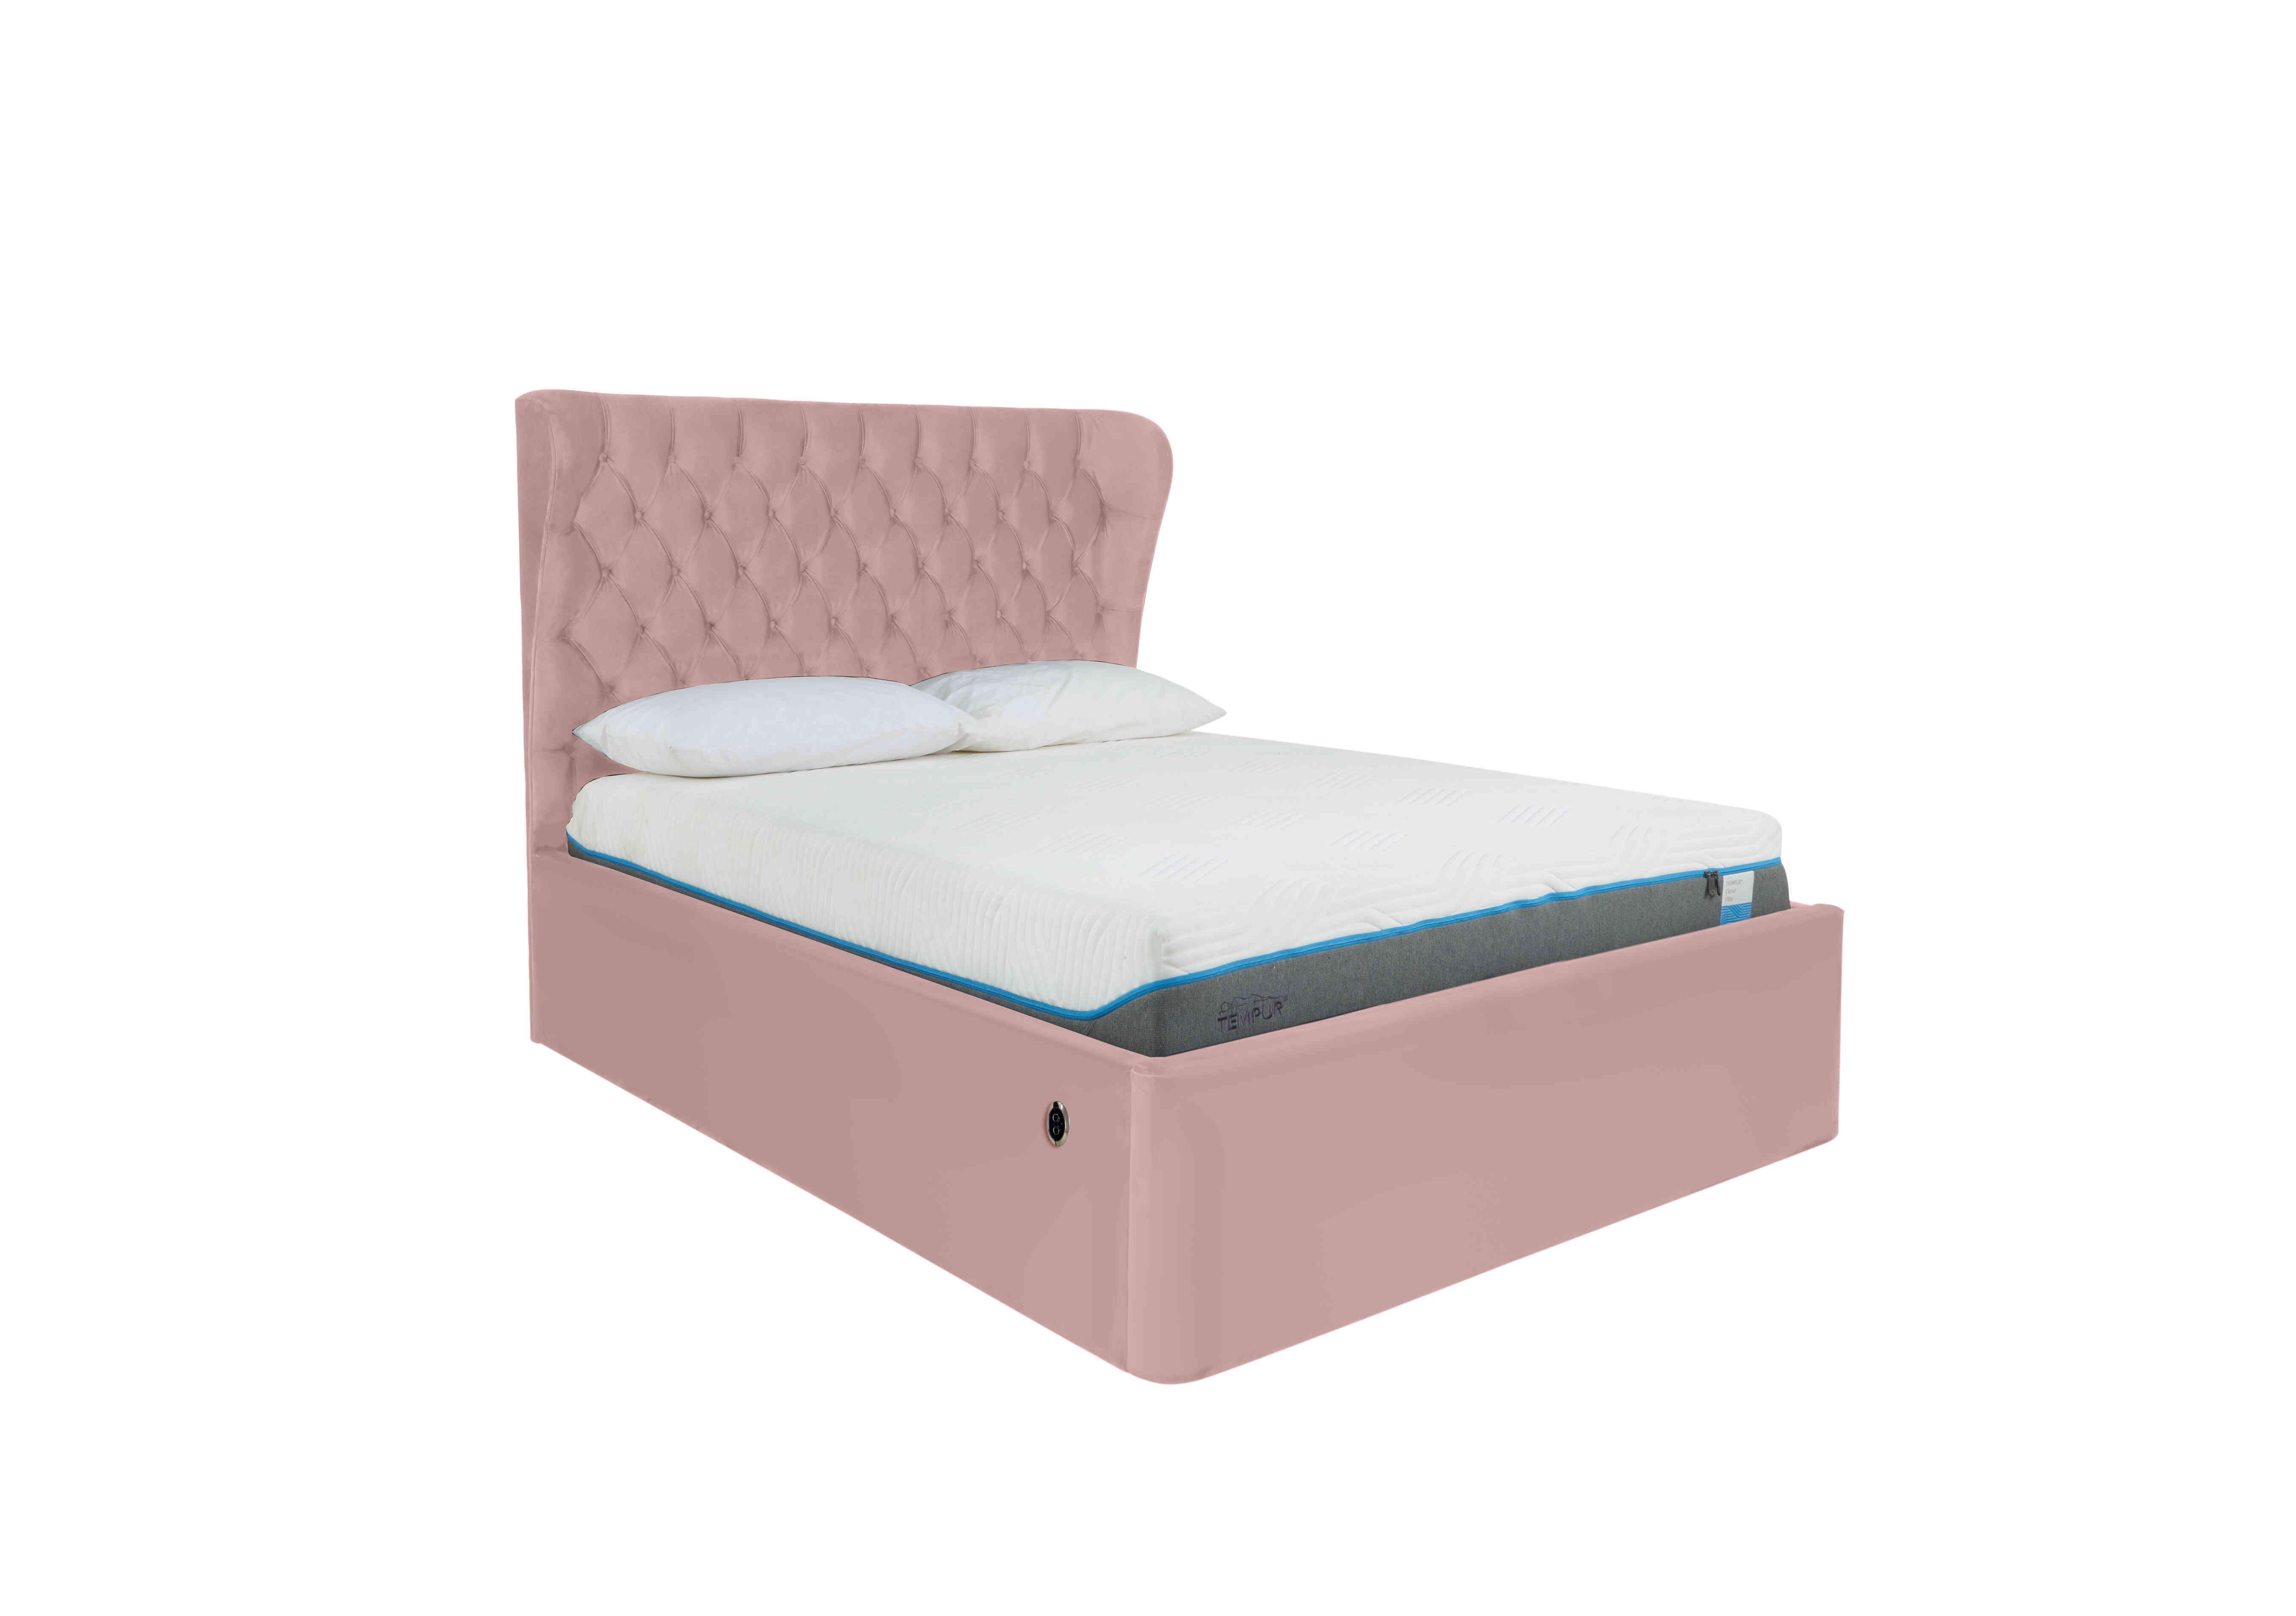 Kendall Electric Ottoman Bed Frame in Sanderson English Garden on Furniture Village